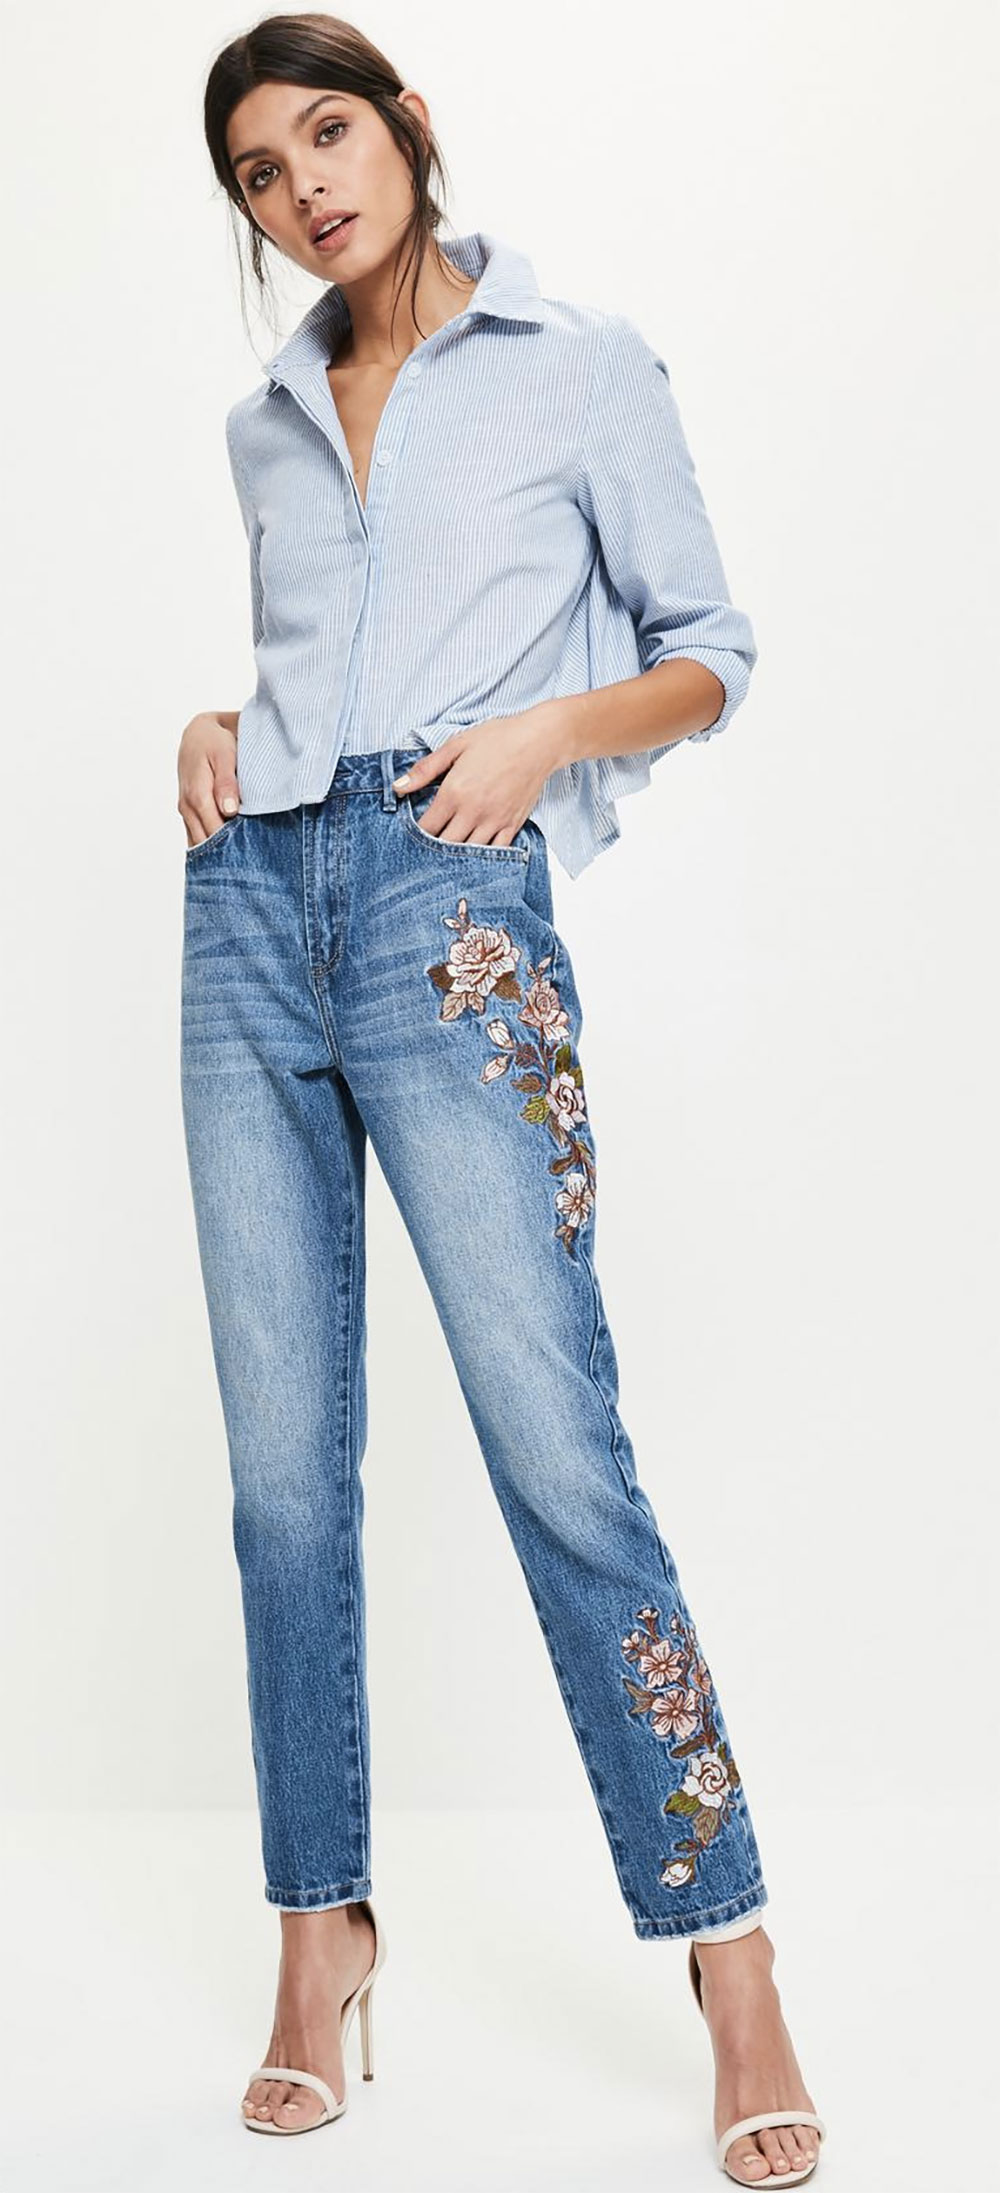 Clues for High-Waisted Jeans - Outfitmag.com